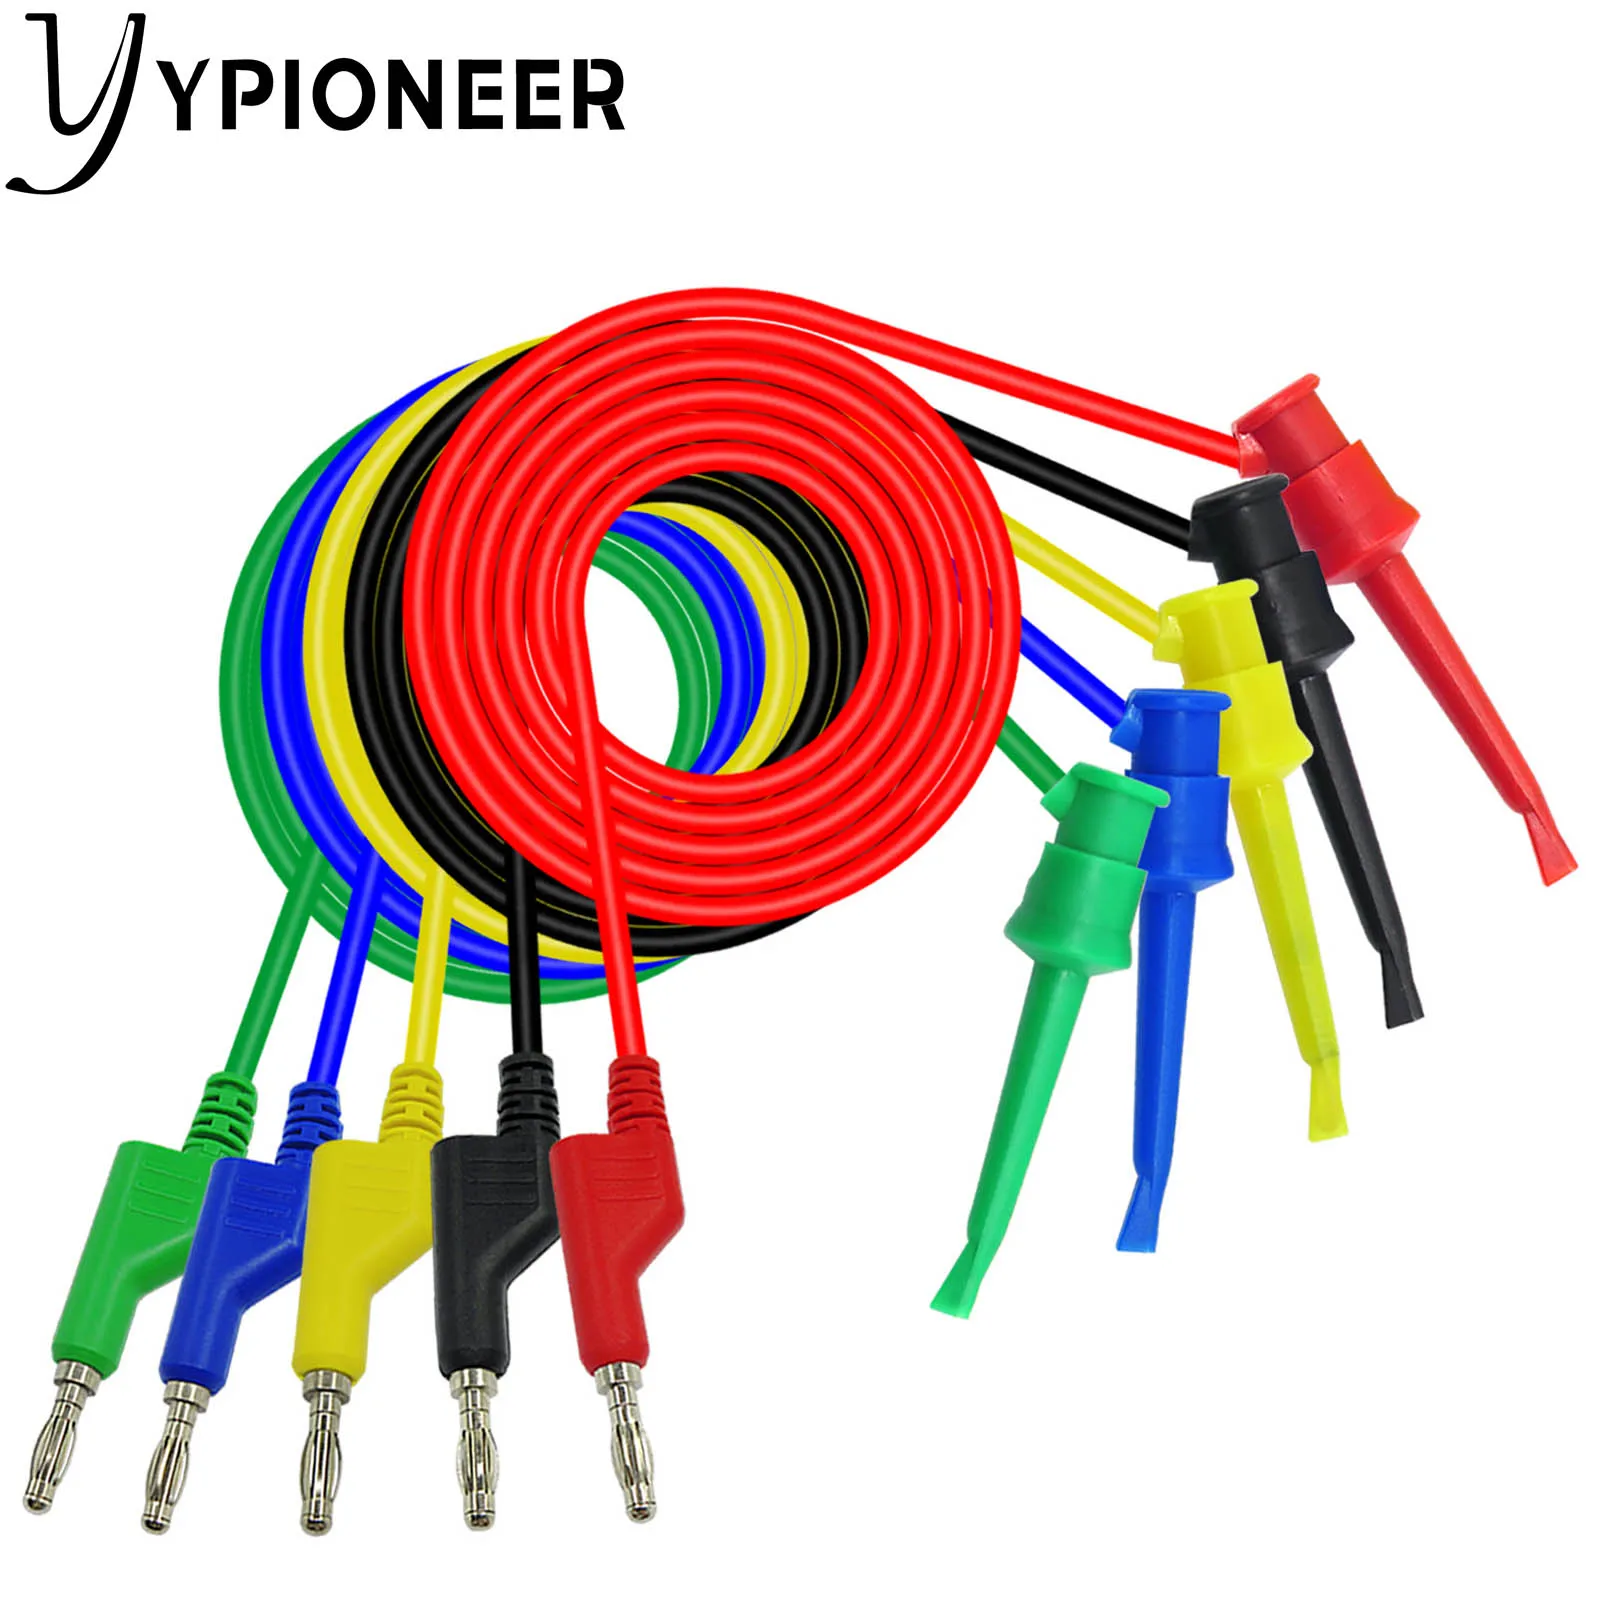 YPioneer P1045 5PCS 4mm Stackable Banana Plug to Mini Grabber Test Hook Clips Test Leads Cables Wires for Electrical Testing